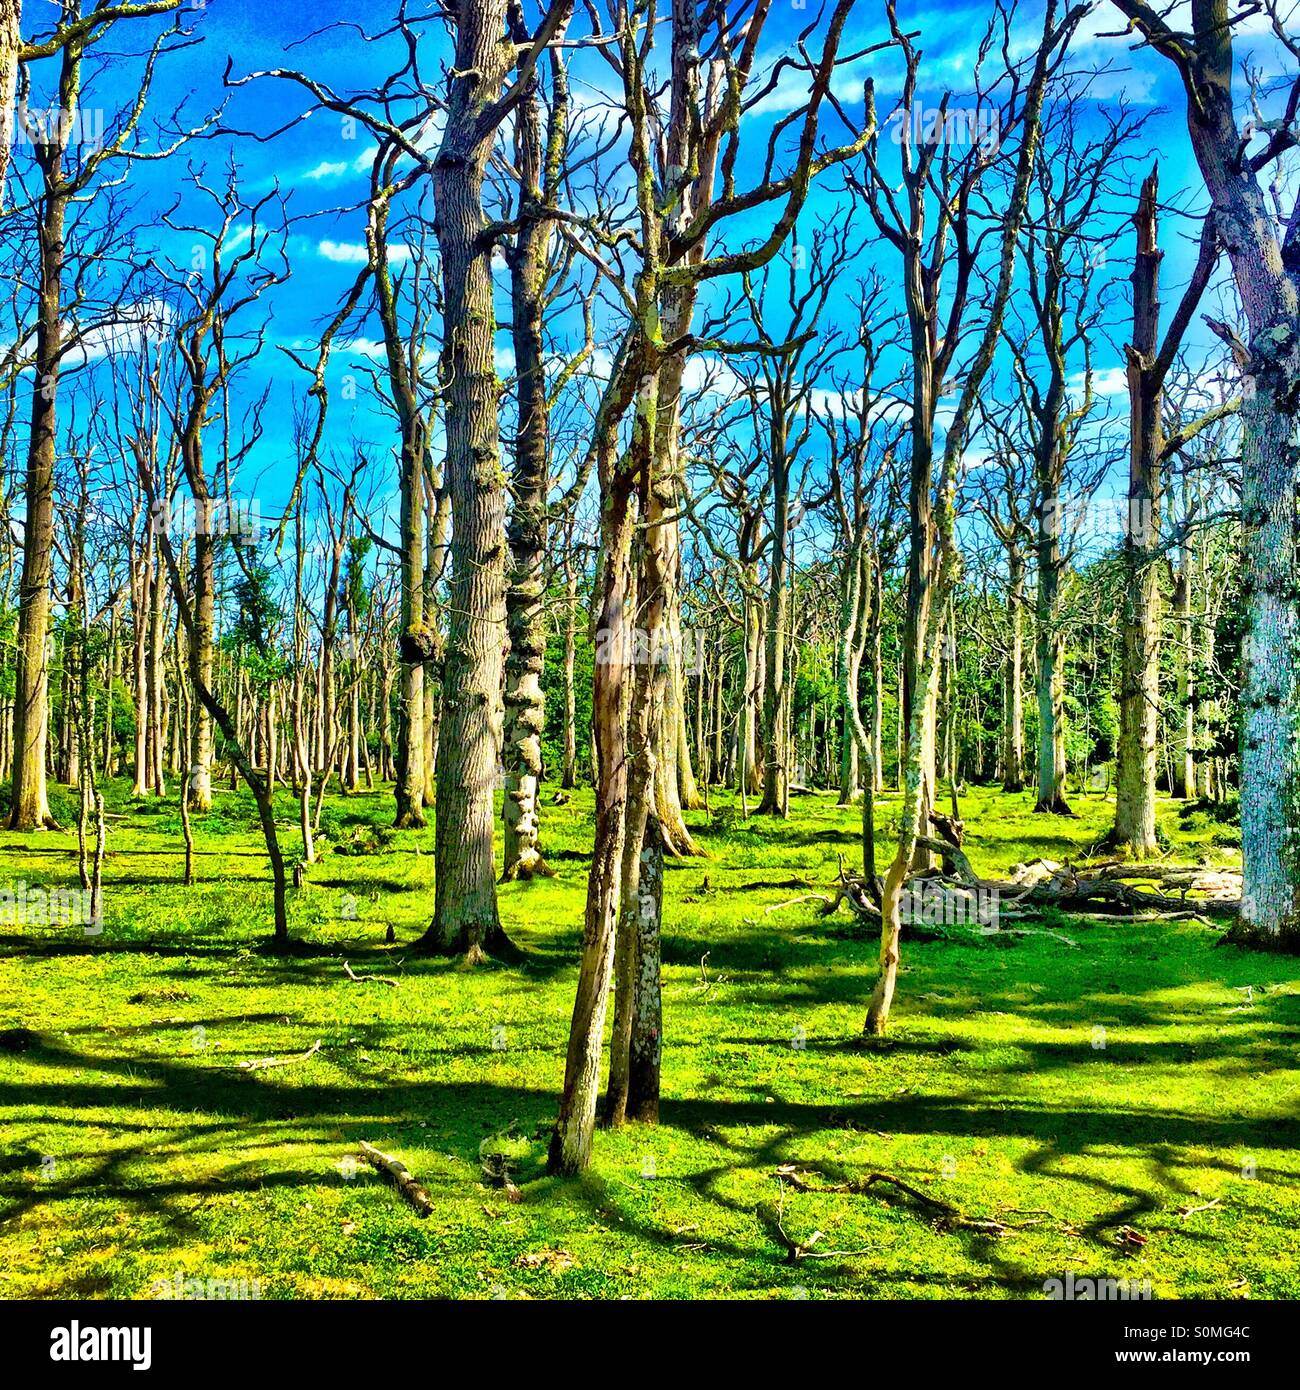 A forest in early spring photographed in the New Forest, U.K. Stock Photo